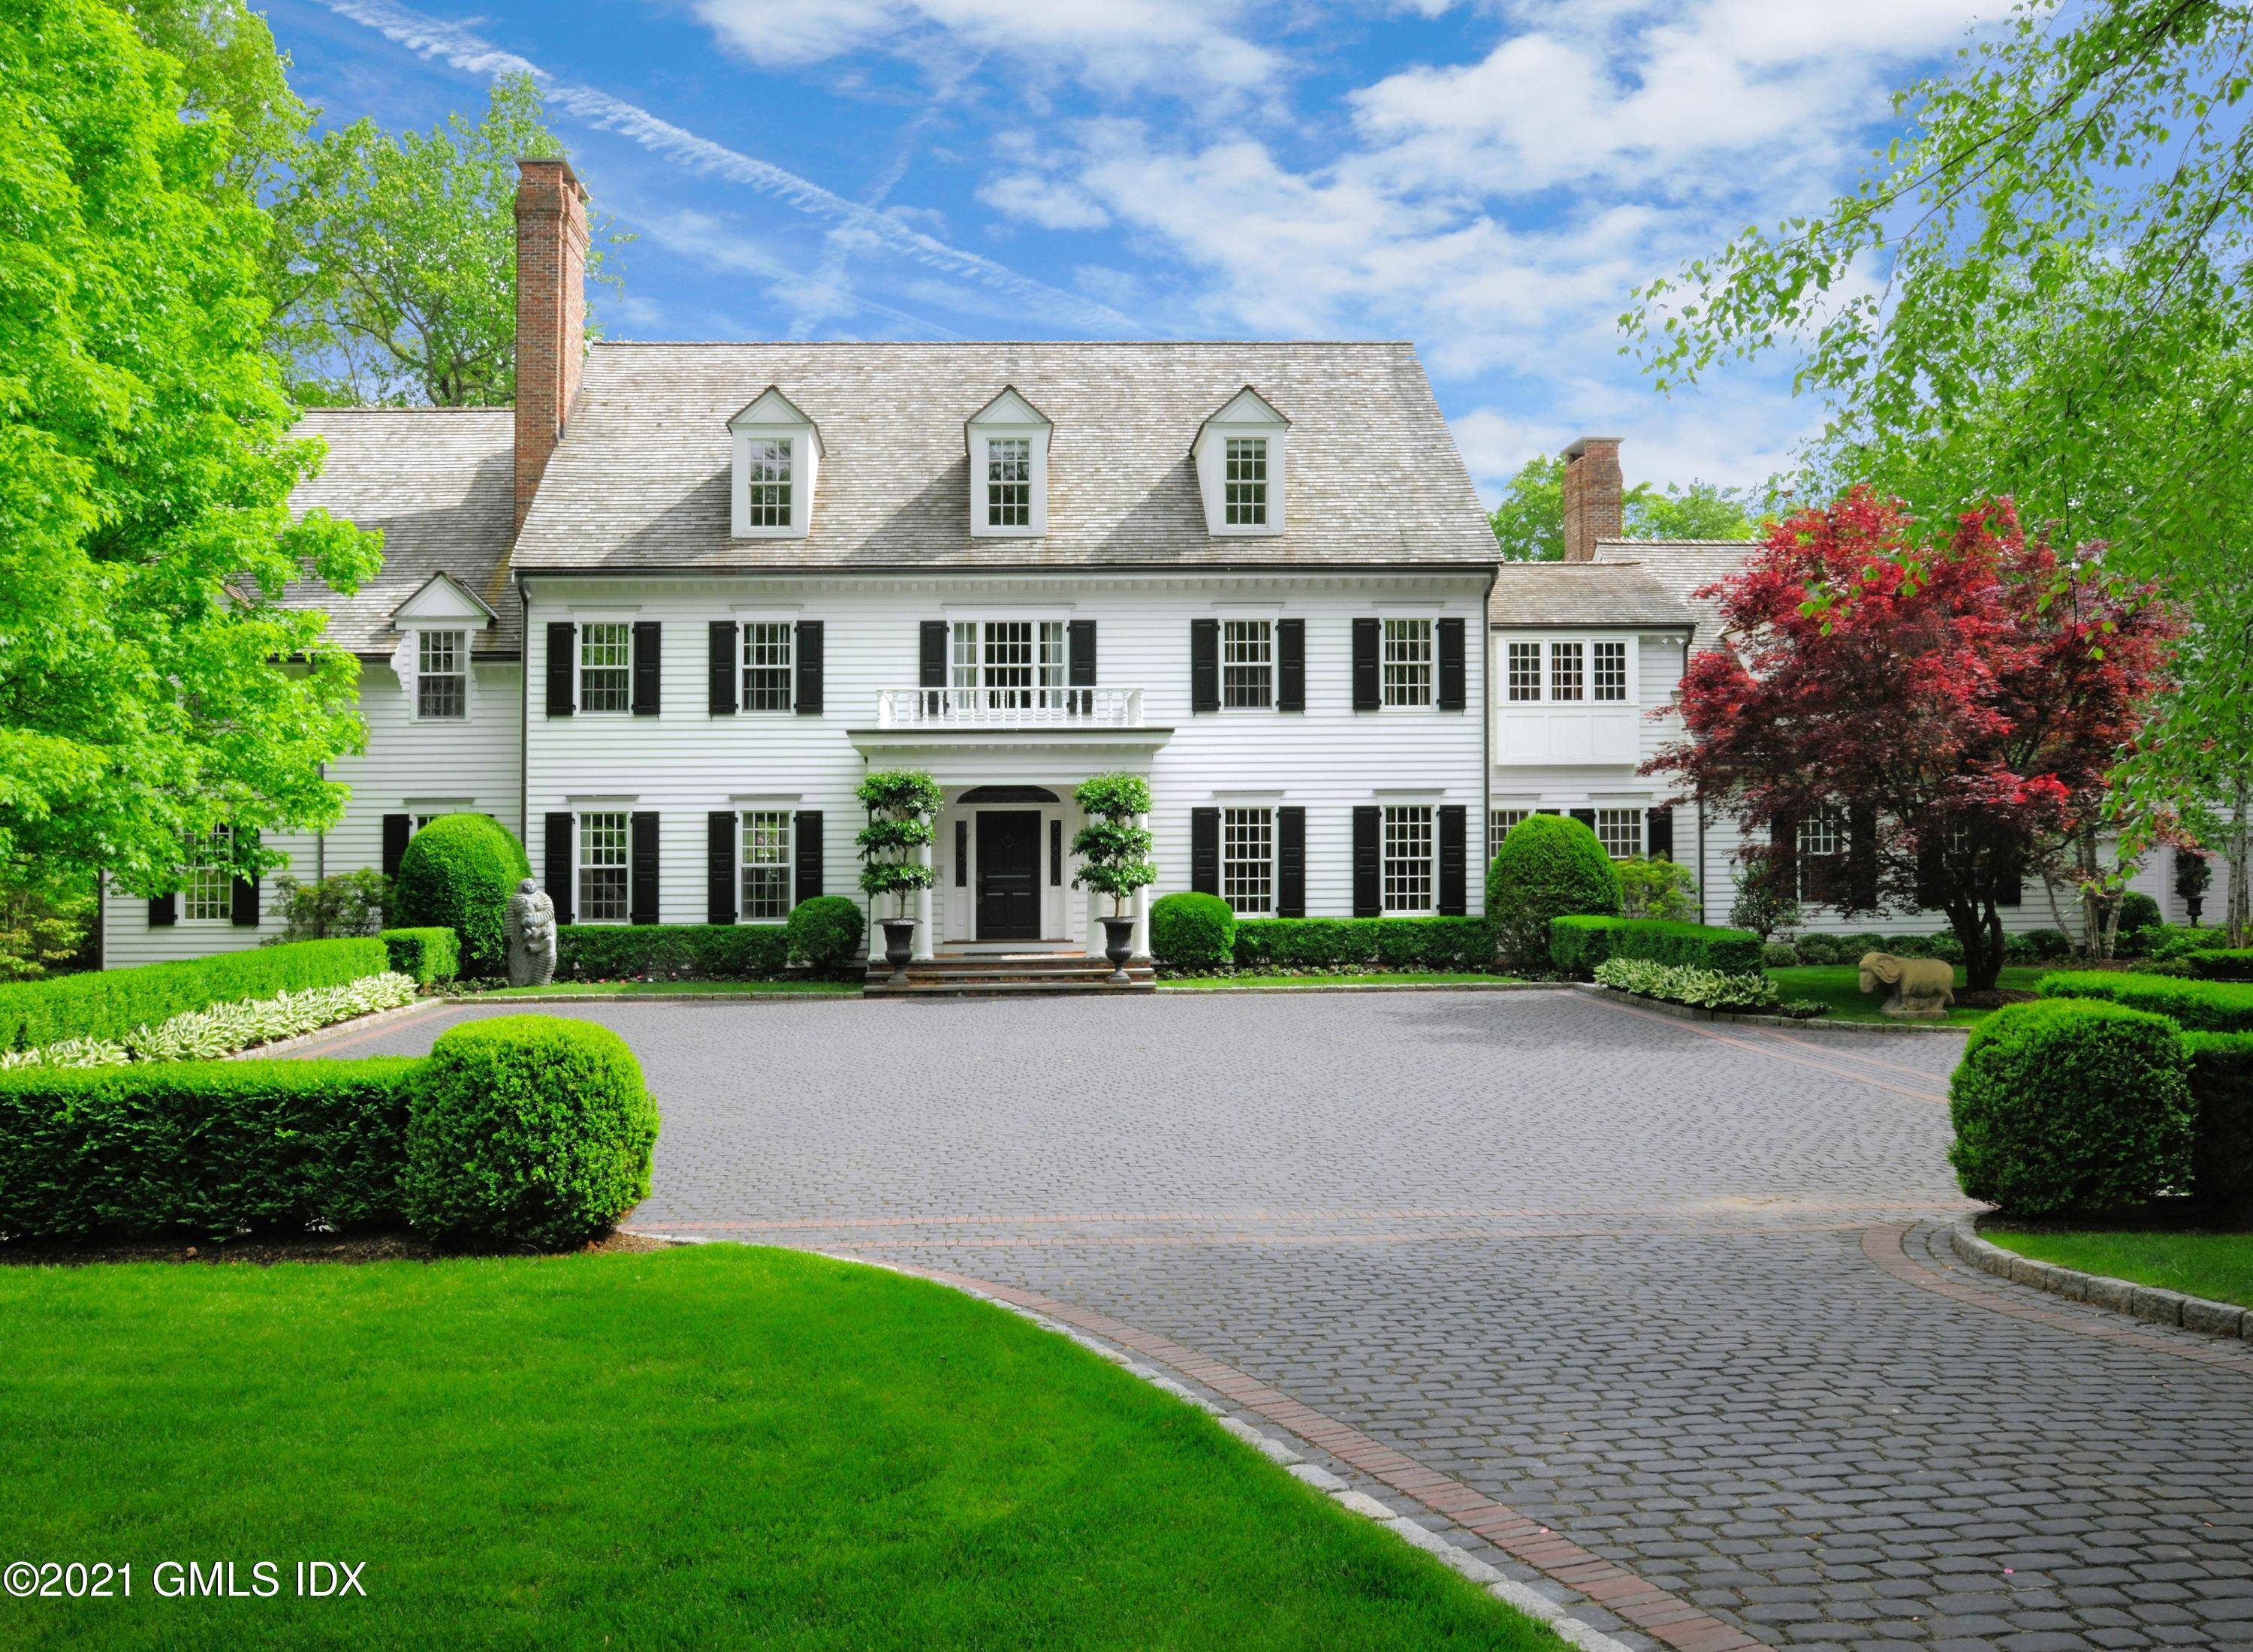 Set among the most notable estates in Greenwich, this Conyers Farm classic pairs a timeless colonial design with 16 private acres.